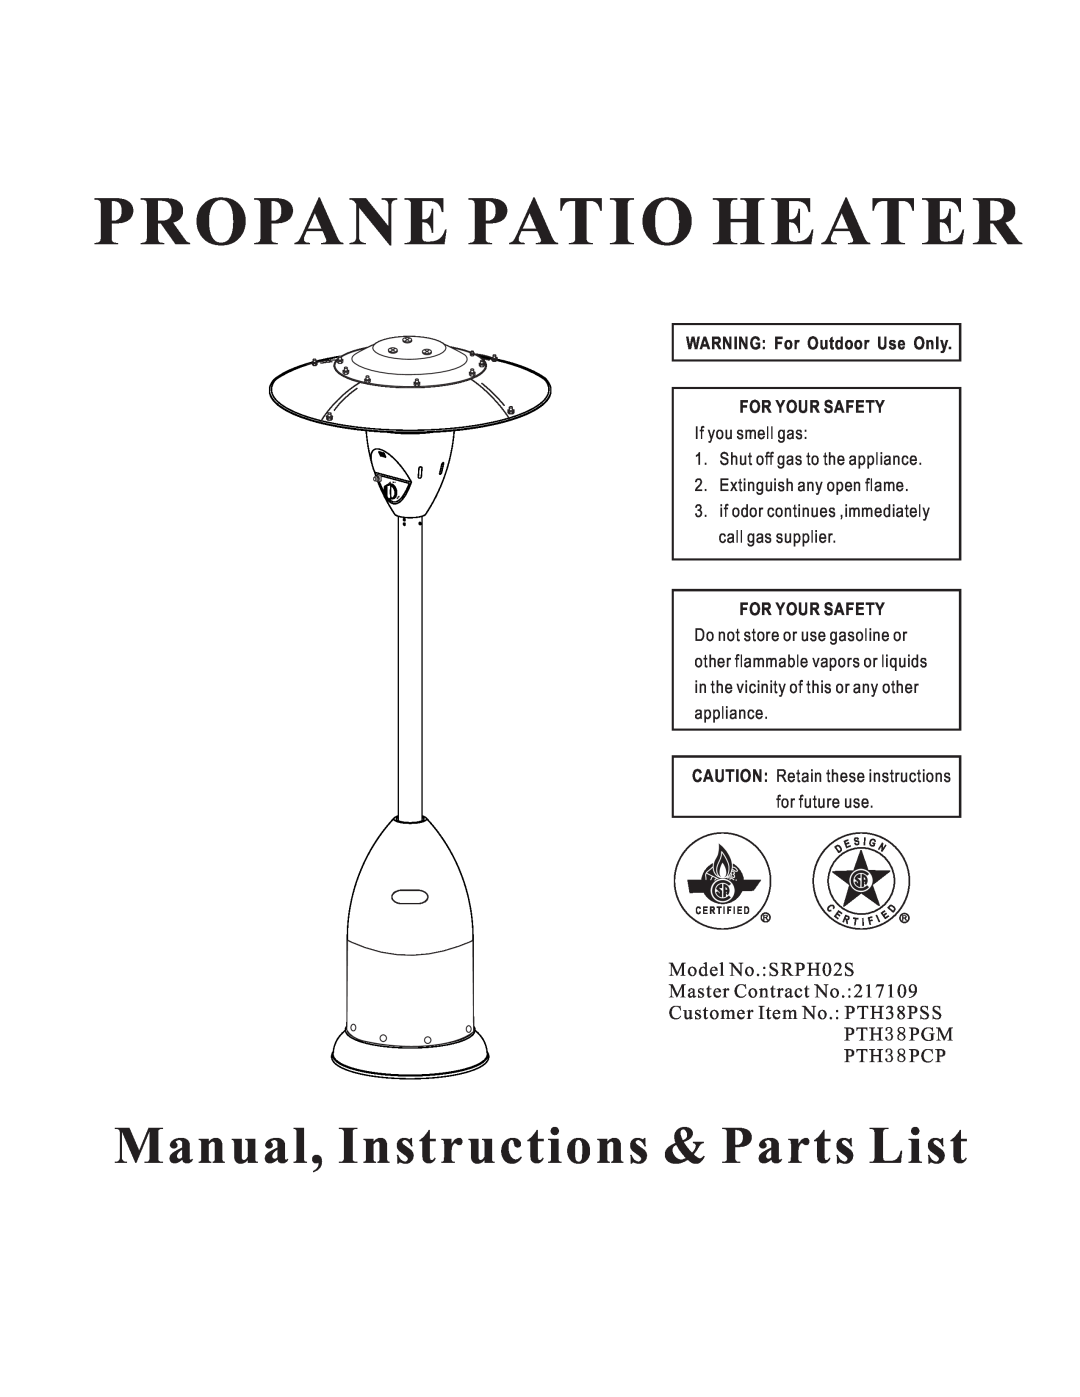 Mr. Heater SRPH02S manual Propane Patio Heater, Manual, Instructions & Parts List, For Your Safety, C E R T I F I E D 